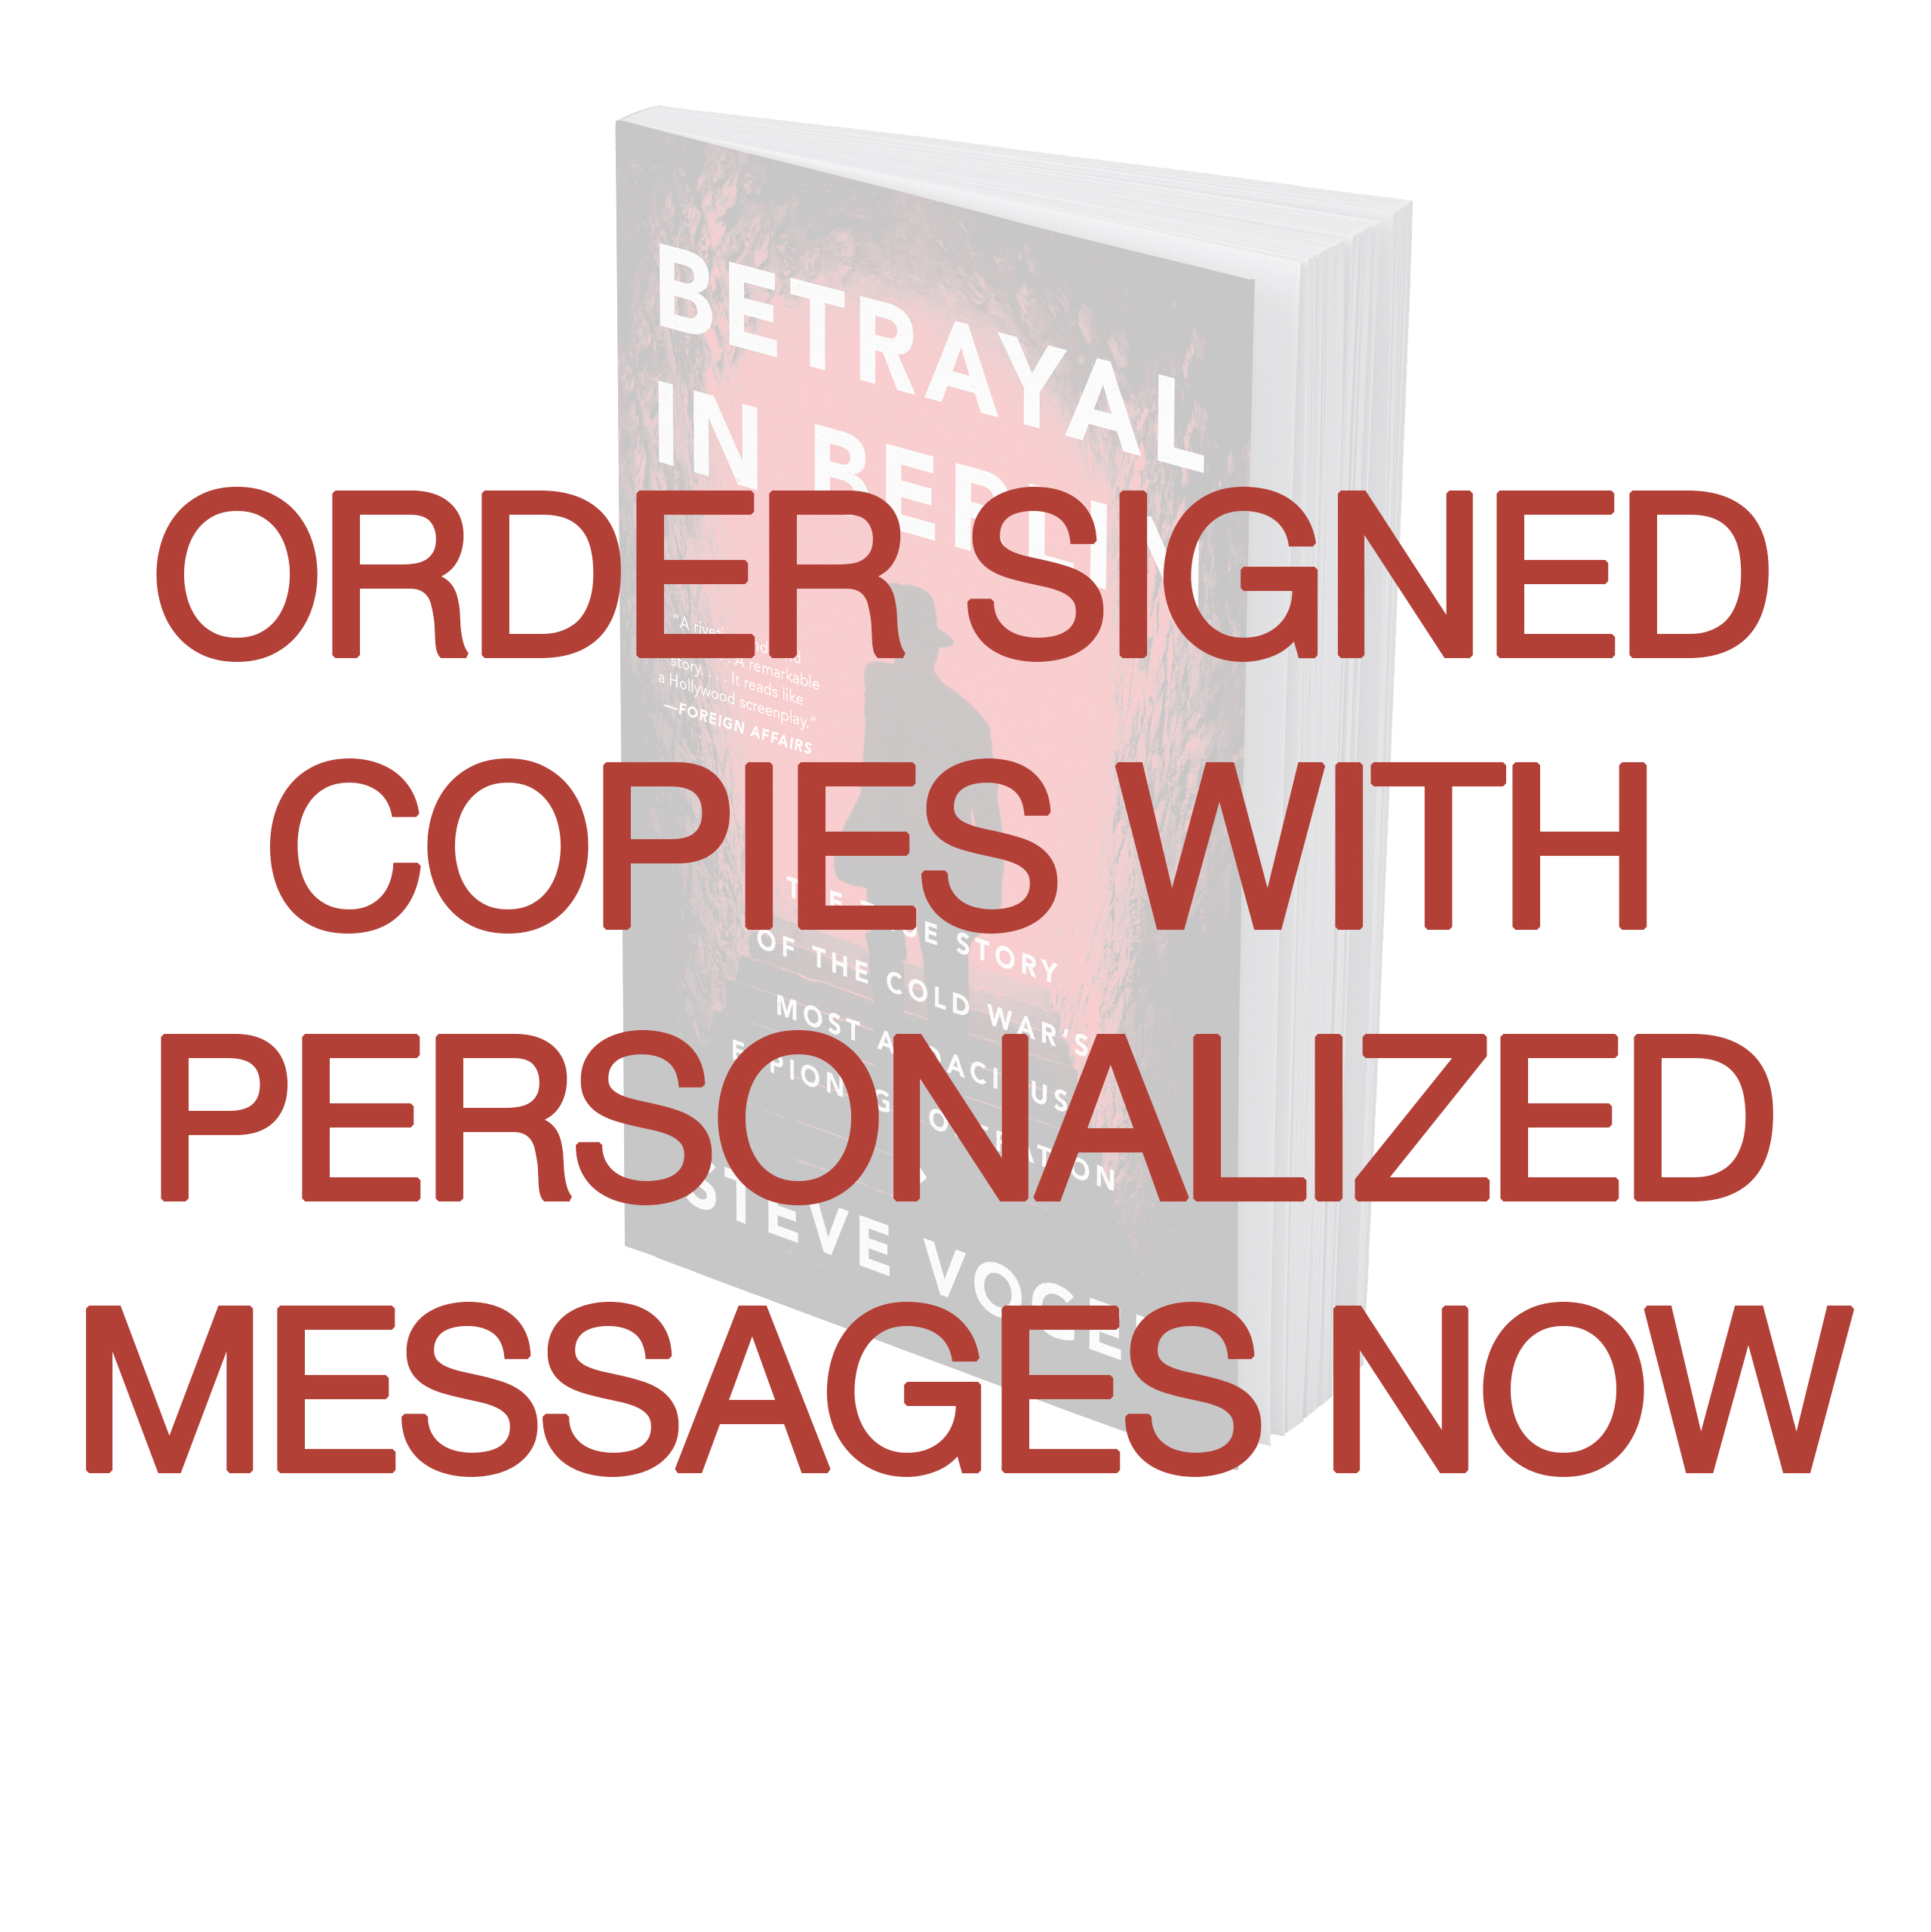 ORDER SIGNED COPIES!